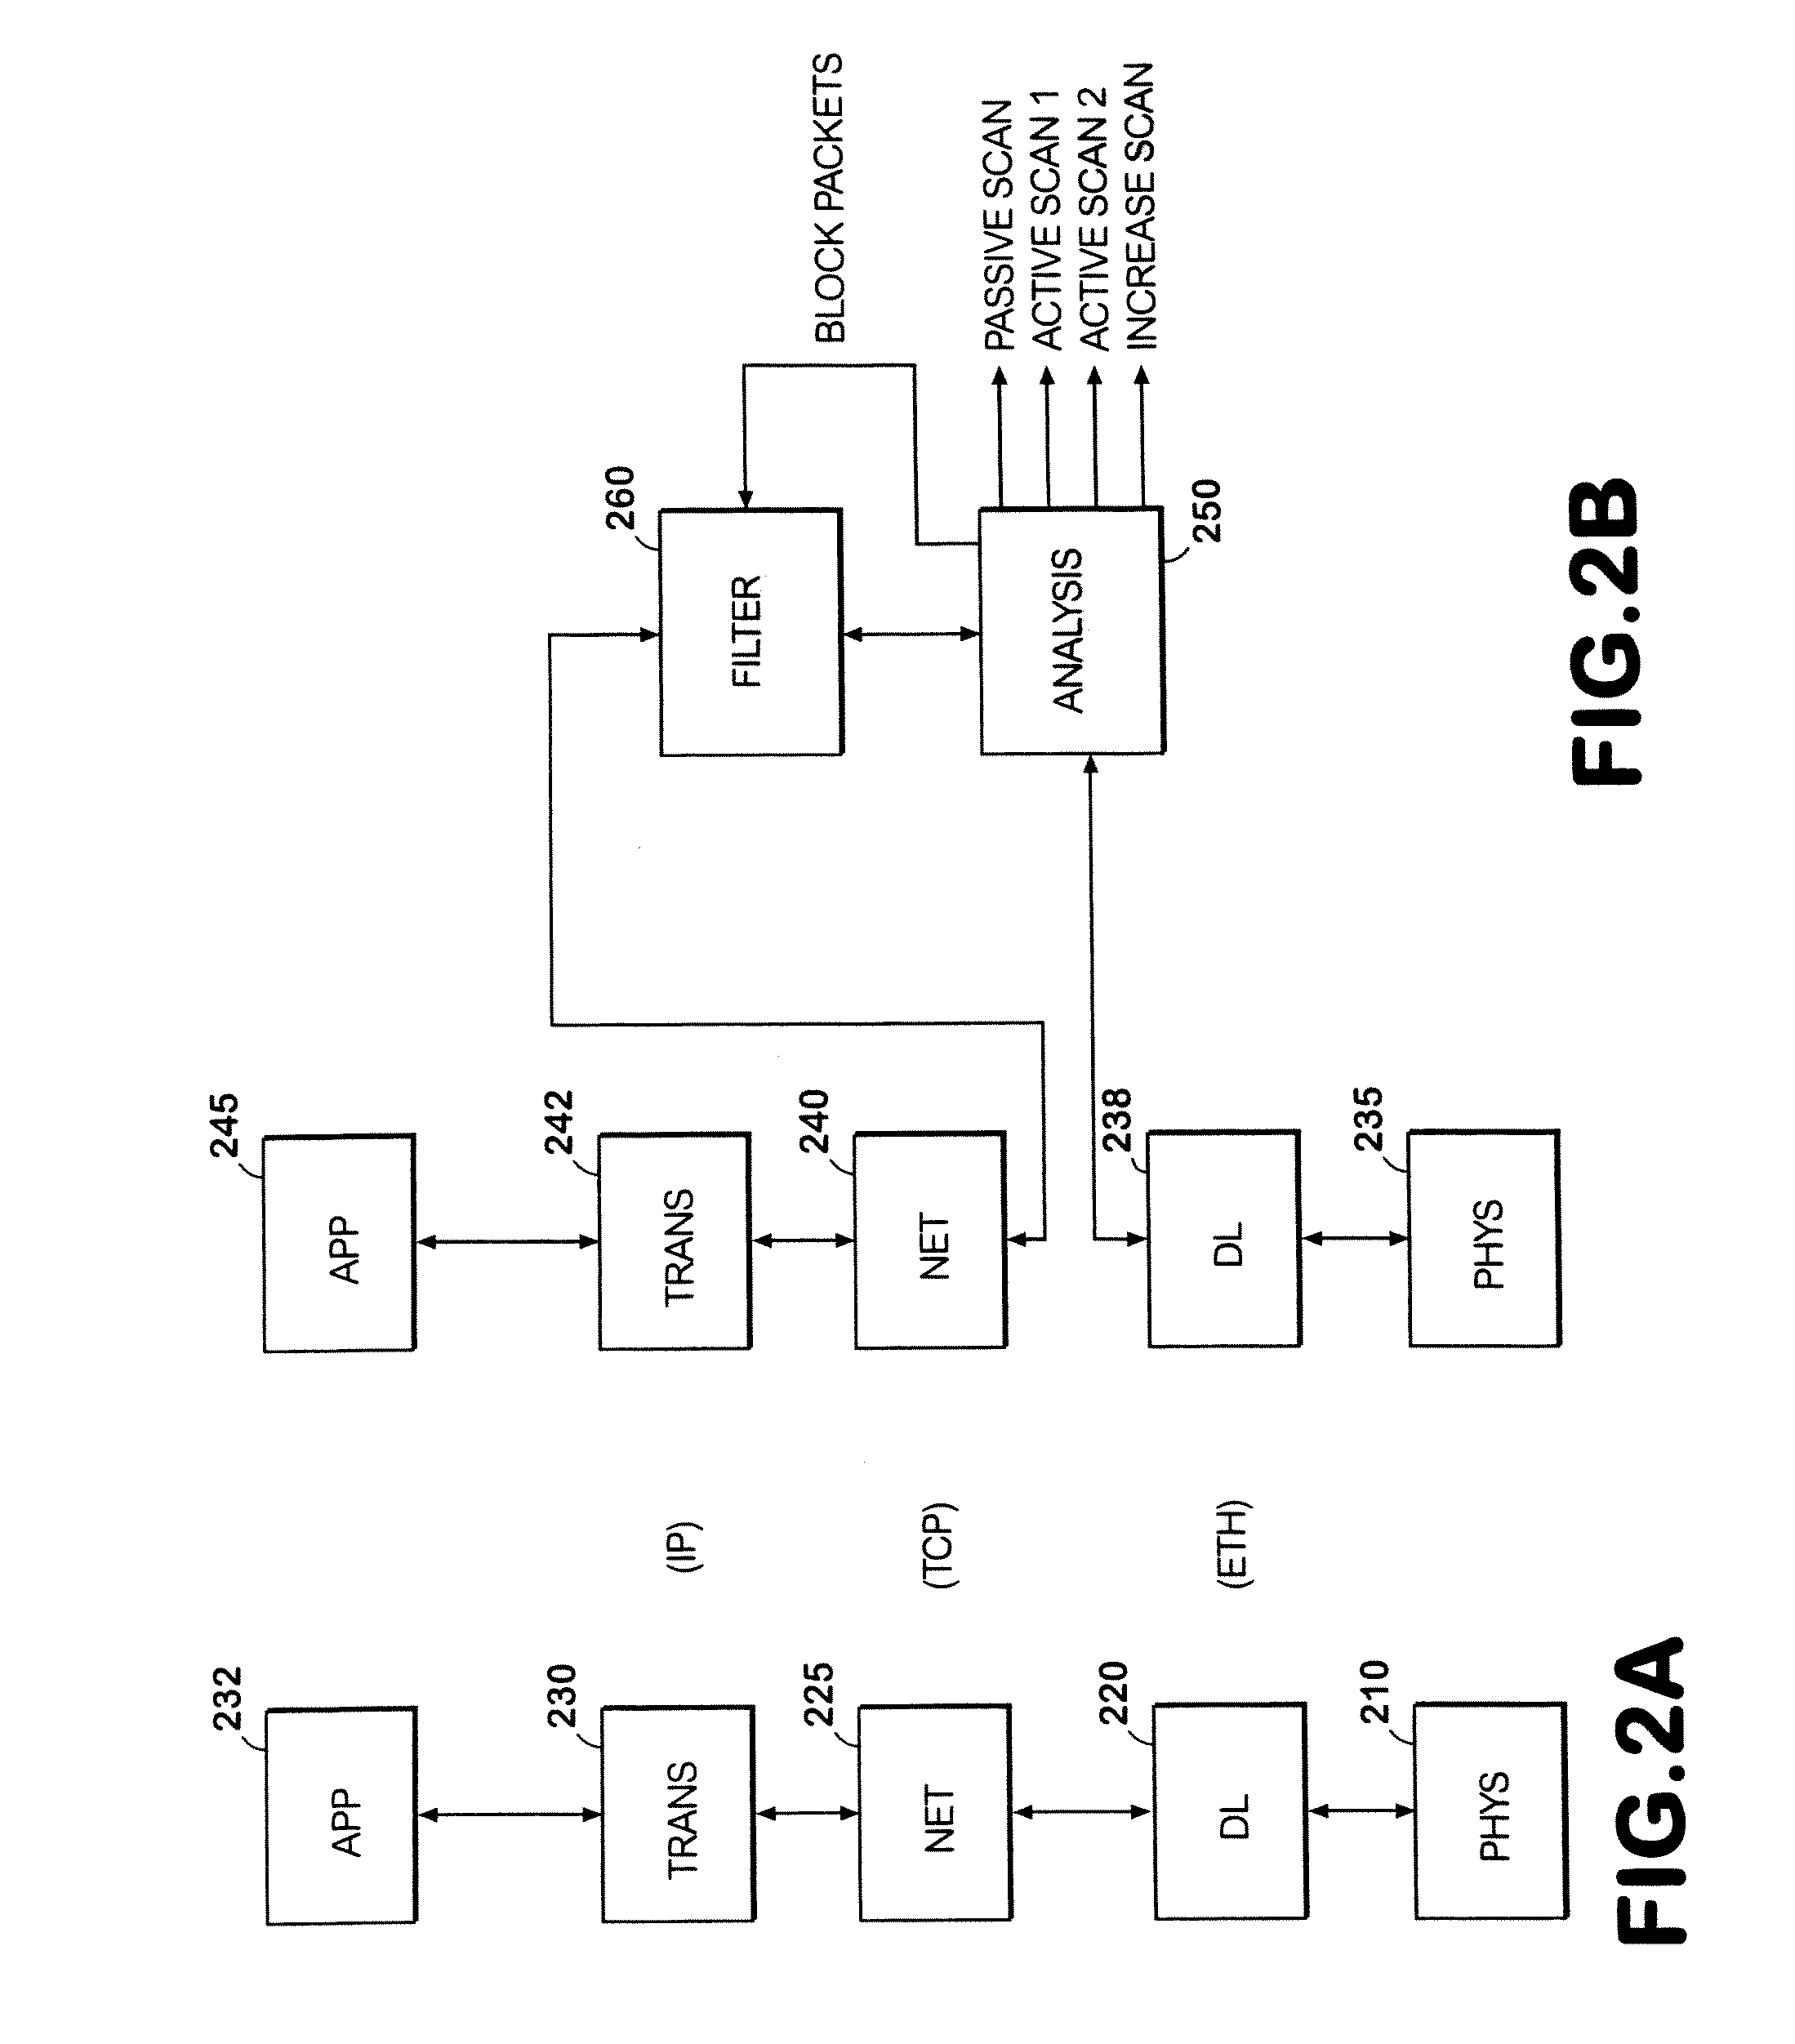 Method and Apparatus for Providing Network and Computer System Security